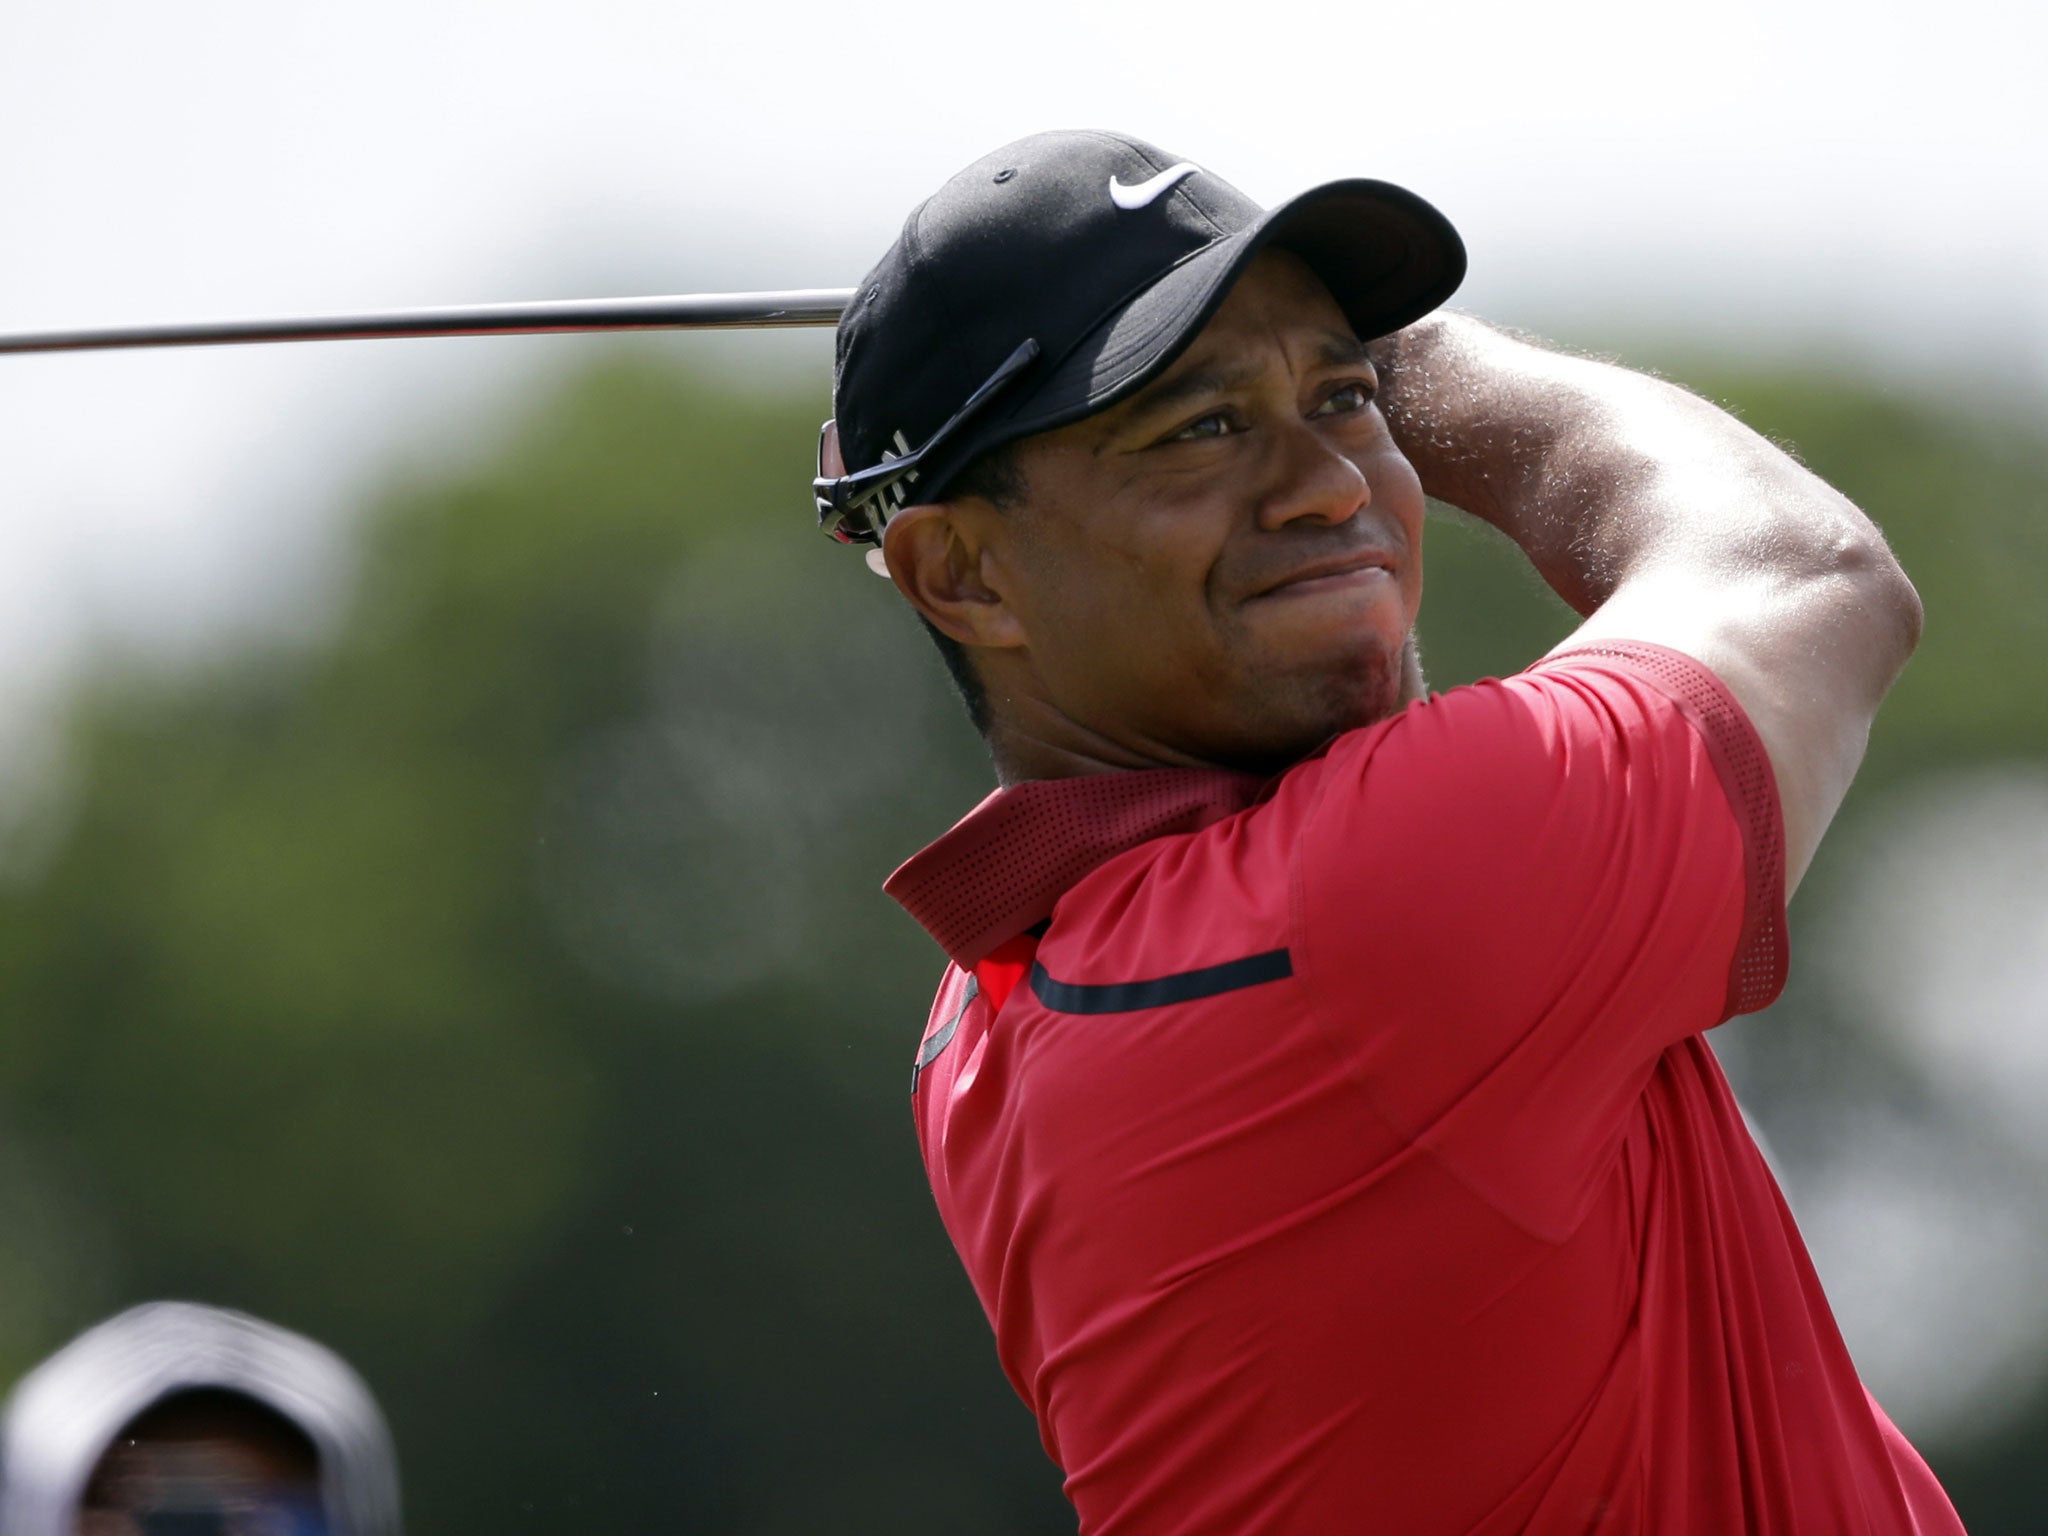 Tiger Woods had a day to forget at Doral after posting an impressive score of 66